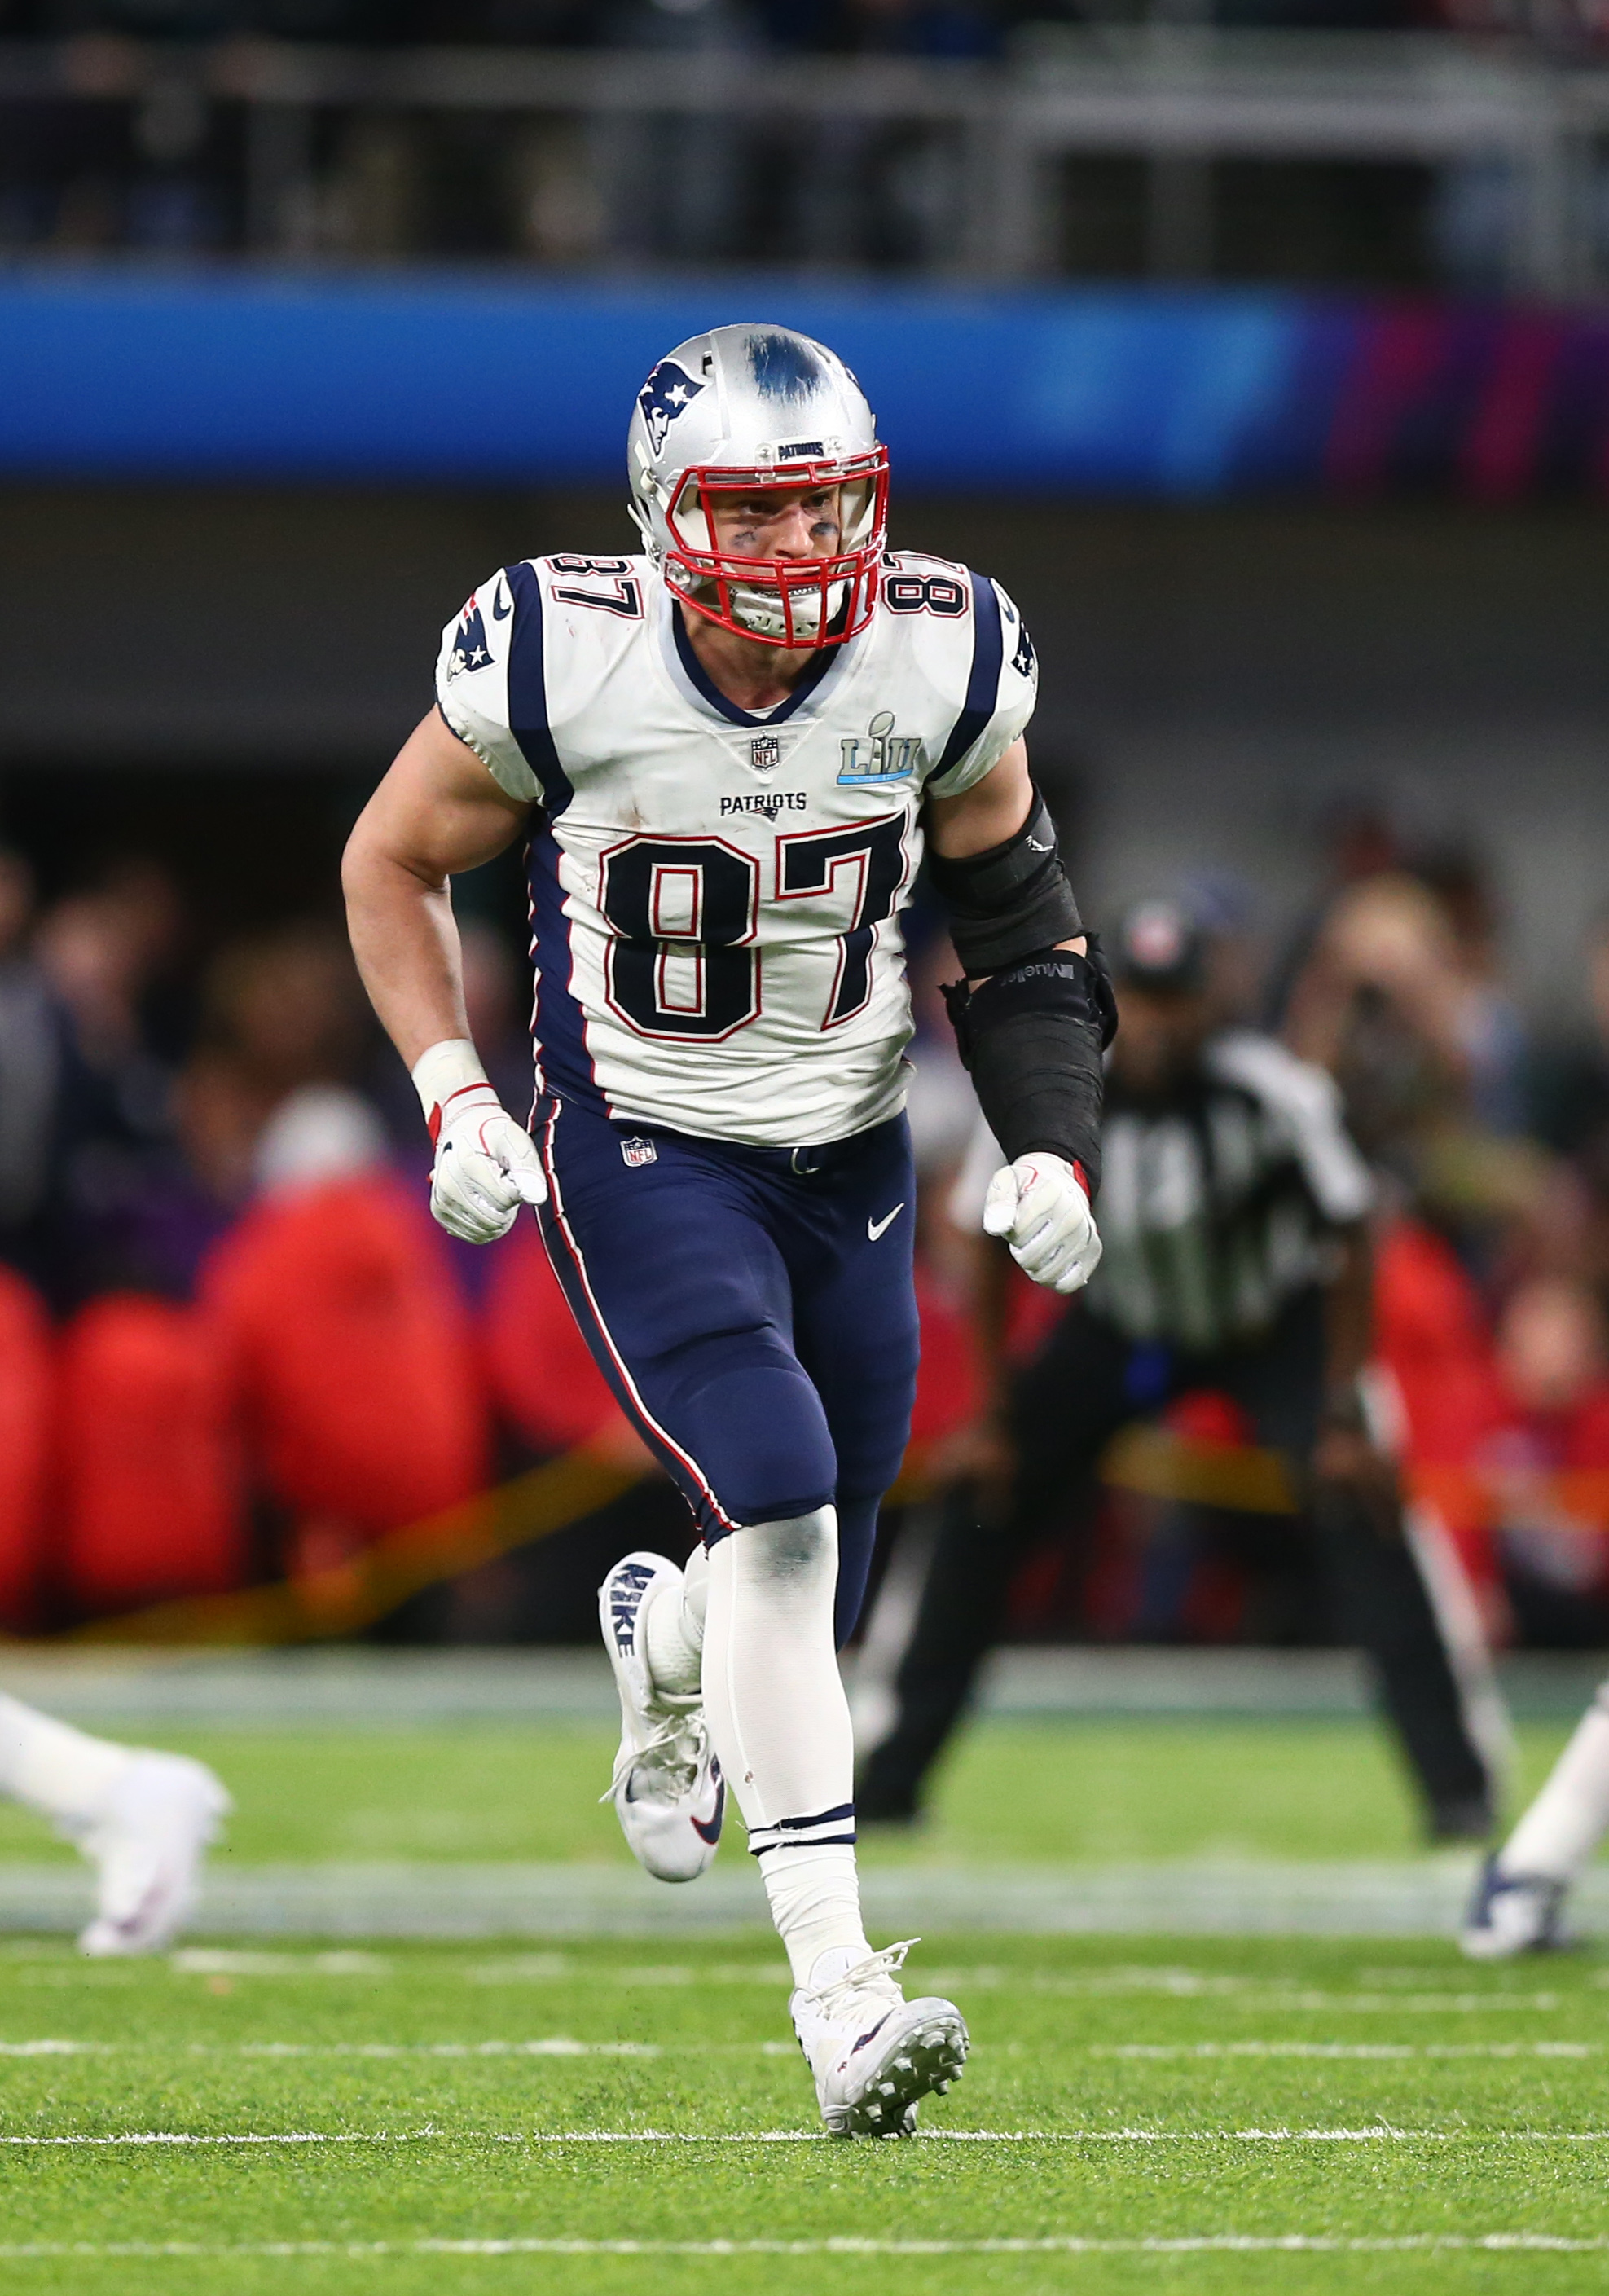 Rob Gronkowki To Play In 20181975 x 2818